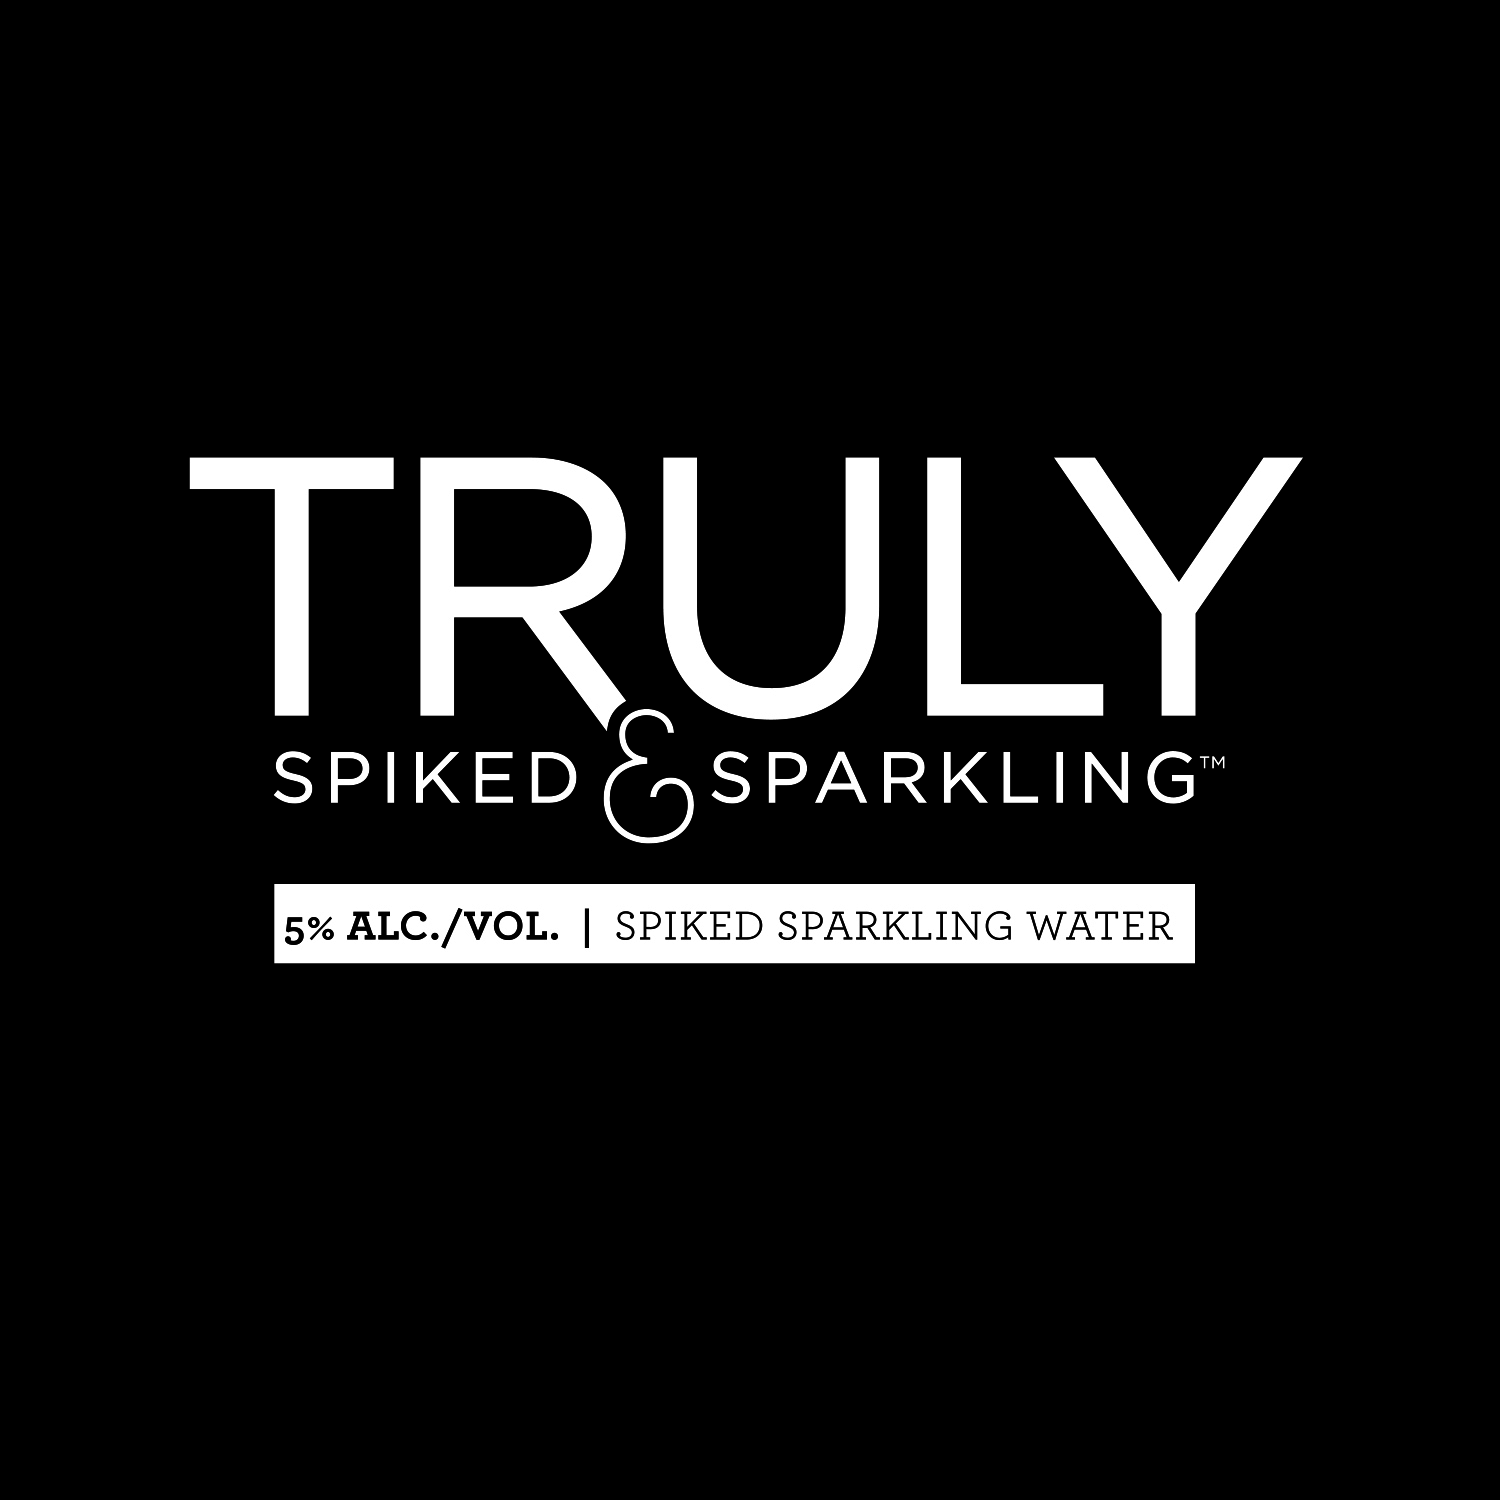 TRULY SPIKED & SPARKLING 